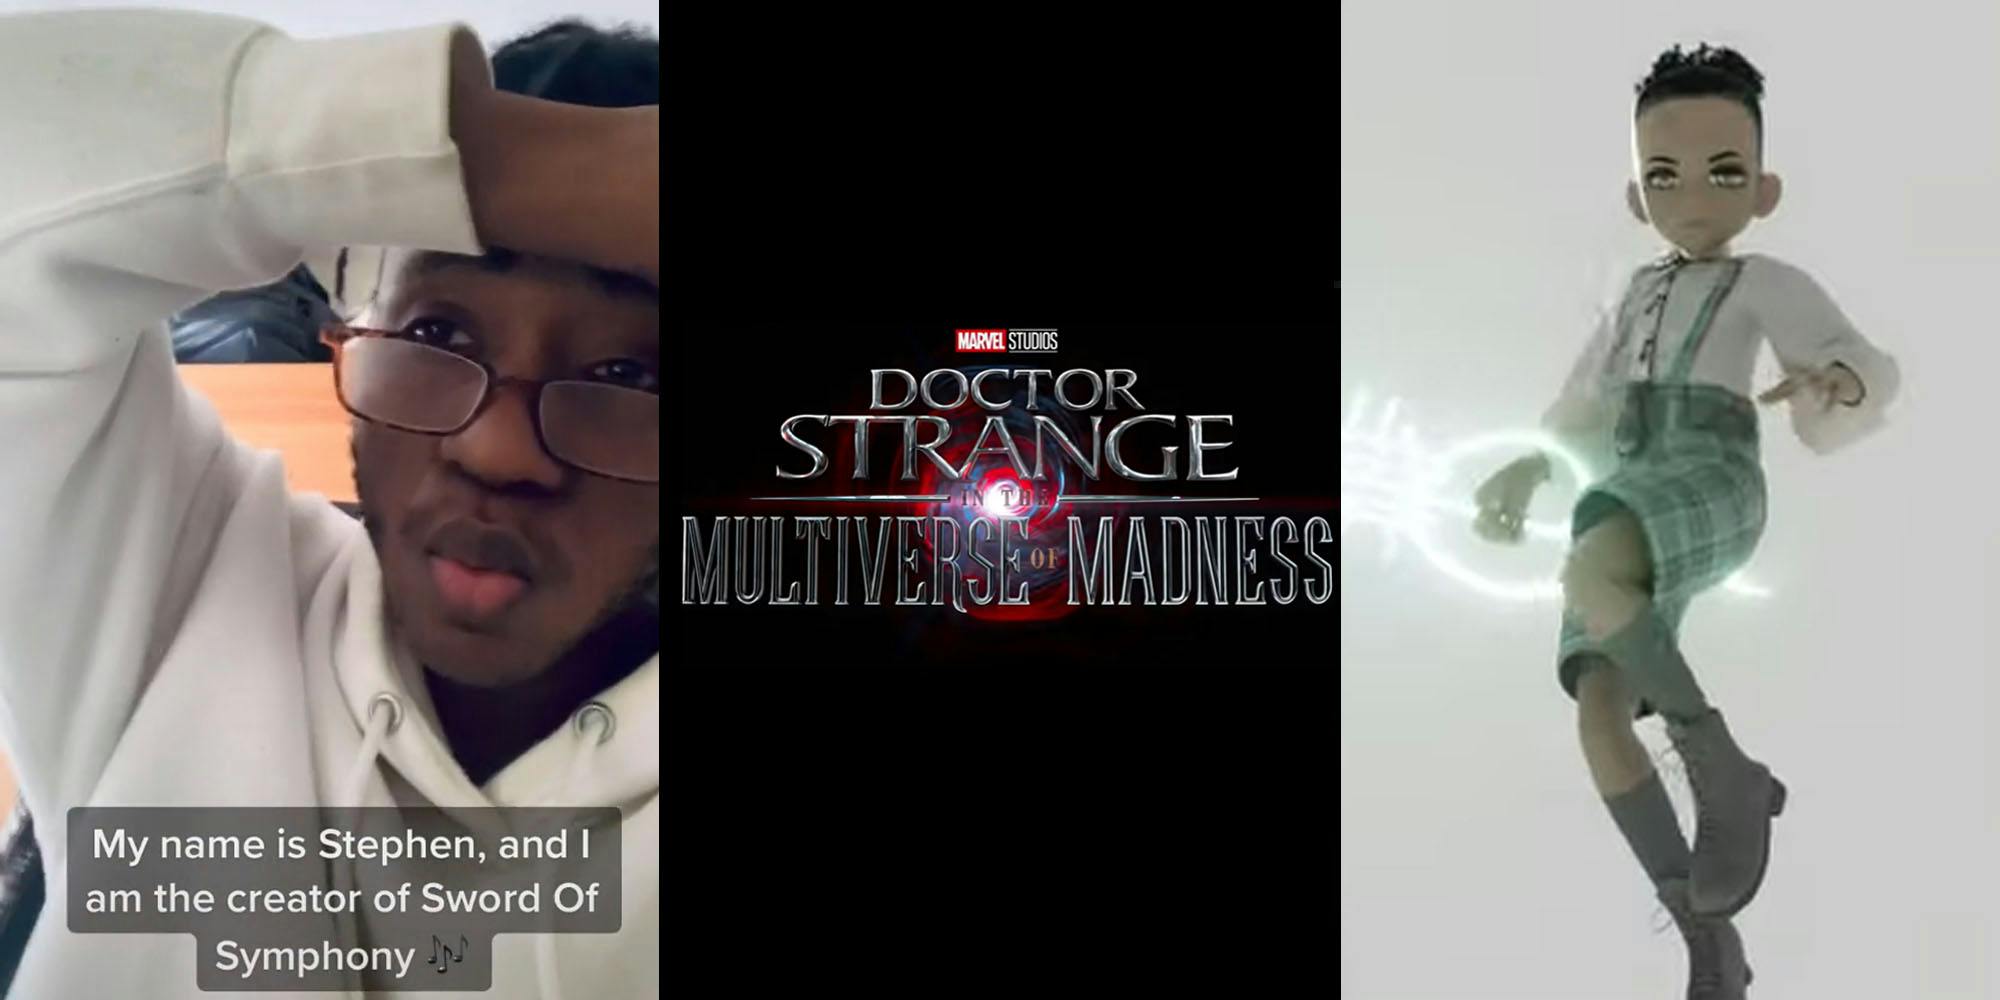 Man holding arm up to head caption "My name is Stephen, and I am the creator of Sword of Symphony (l) Doctor Strange in the Multiverse of Madness trailer logo on black background (c) Sword Of Symphony animated character on white background (r)